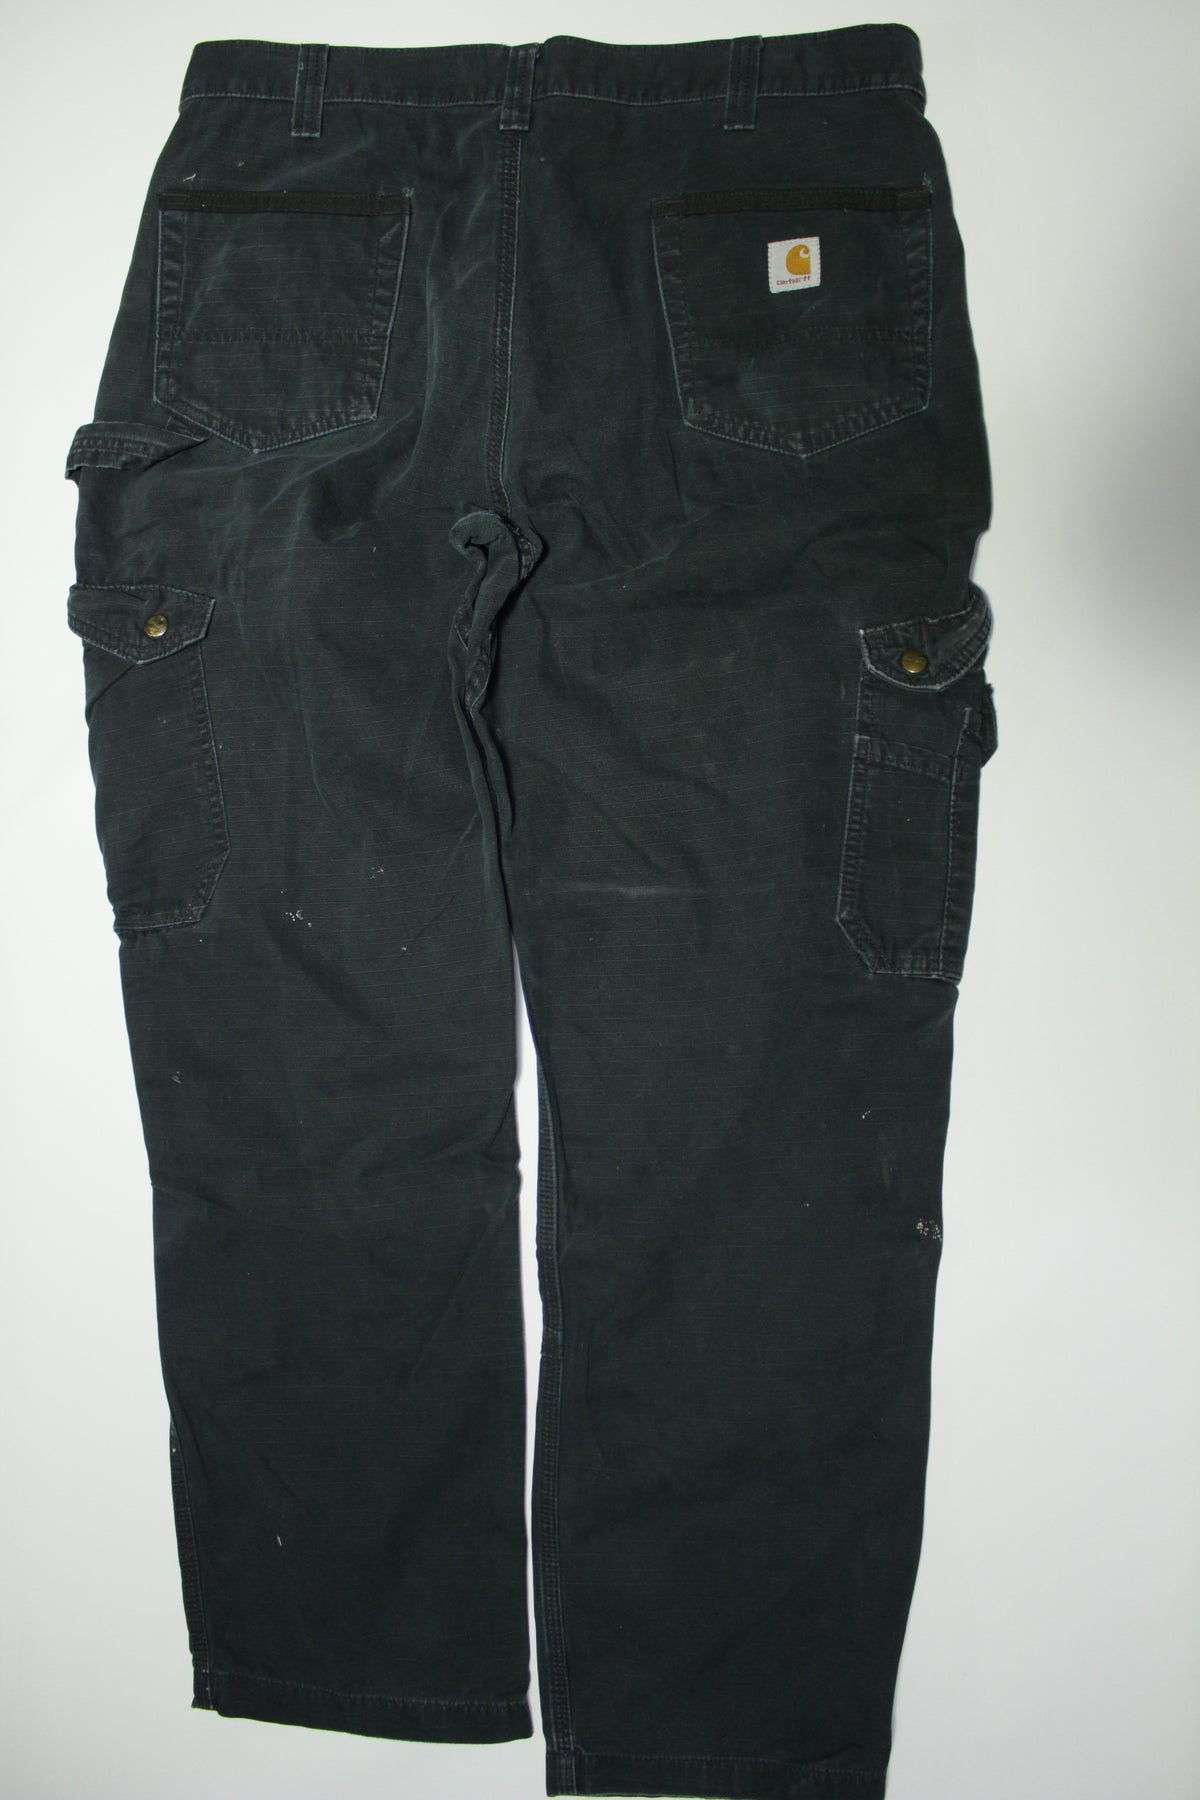 Carhartt B324 Ripstop Double Knee Relaxed Work Utility Cargo Pants